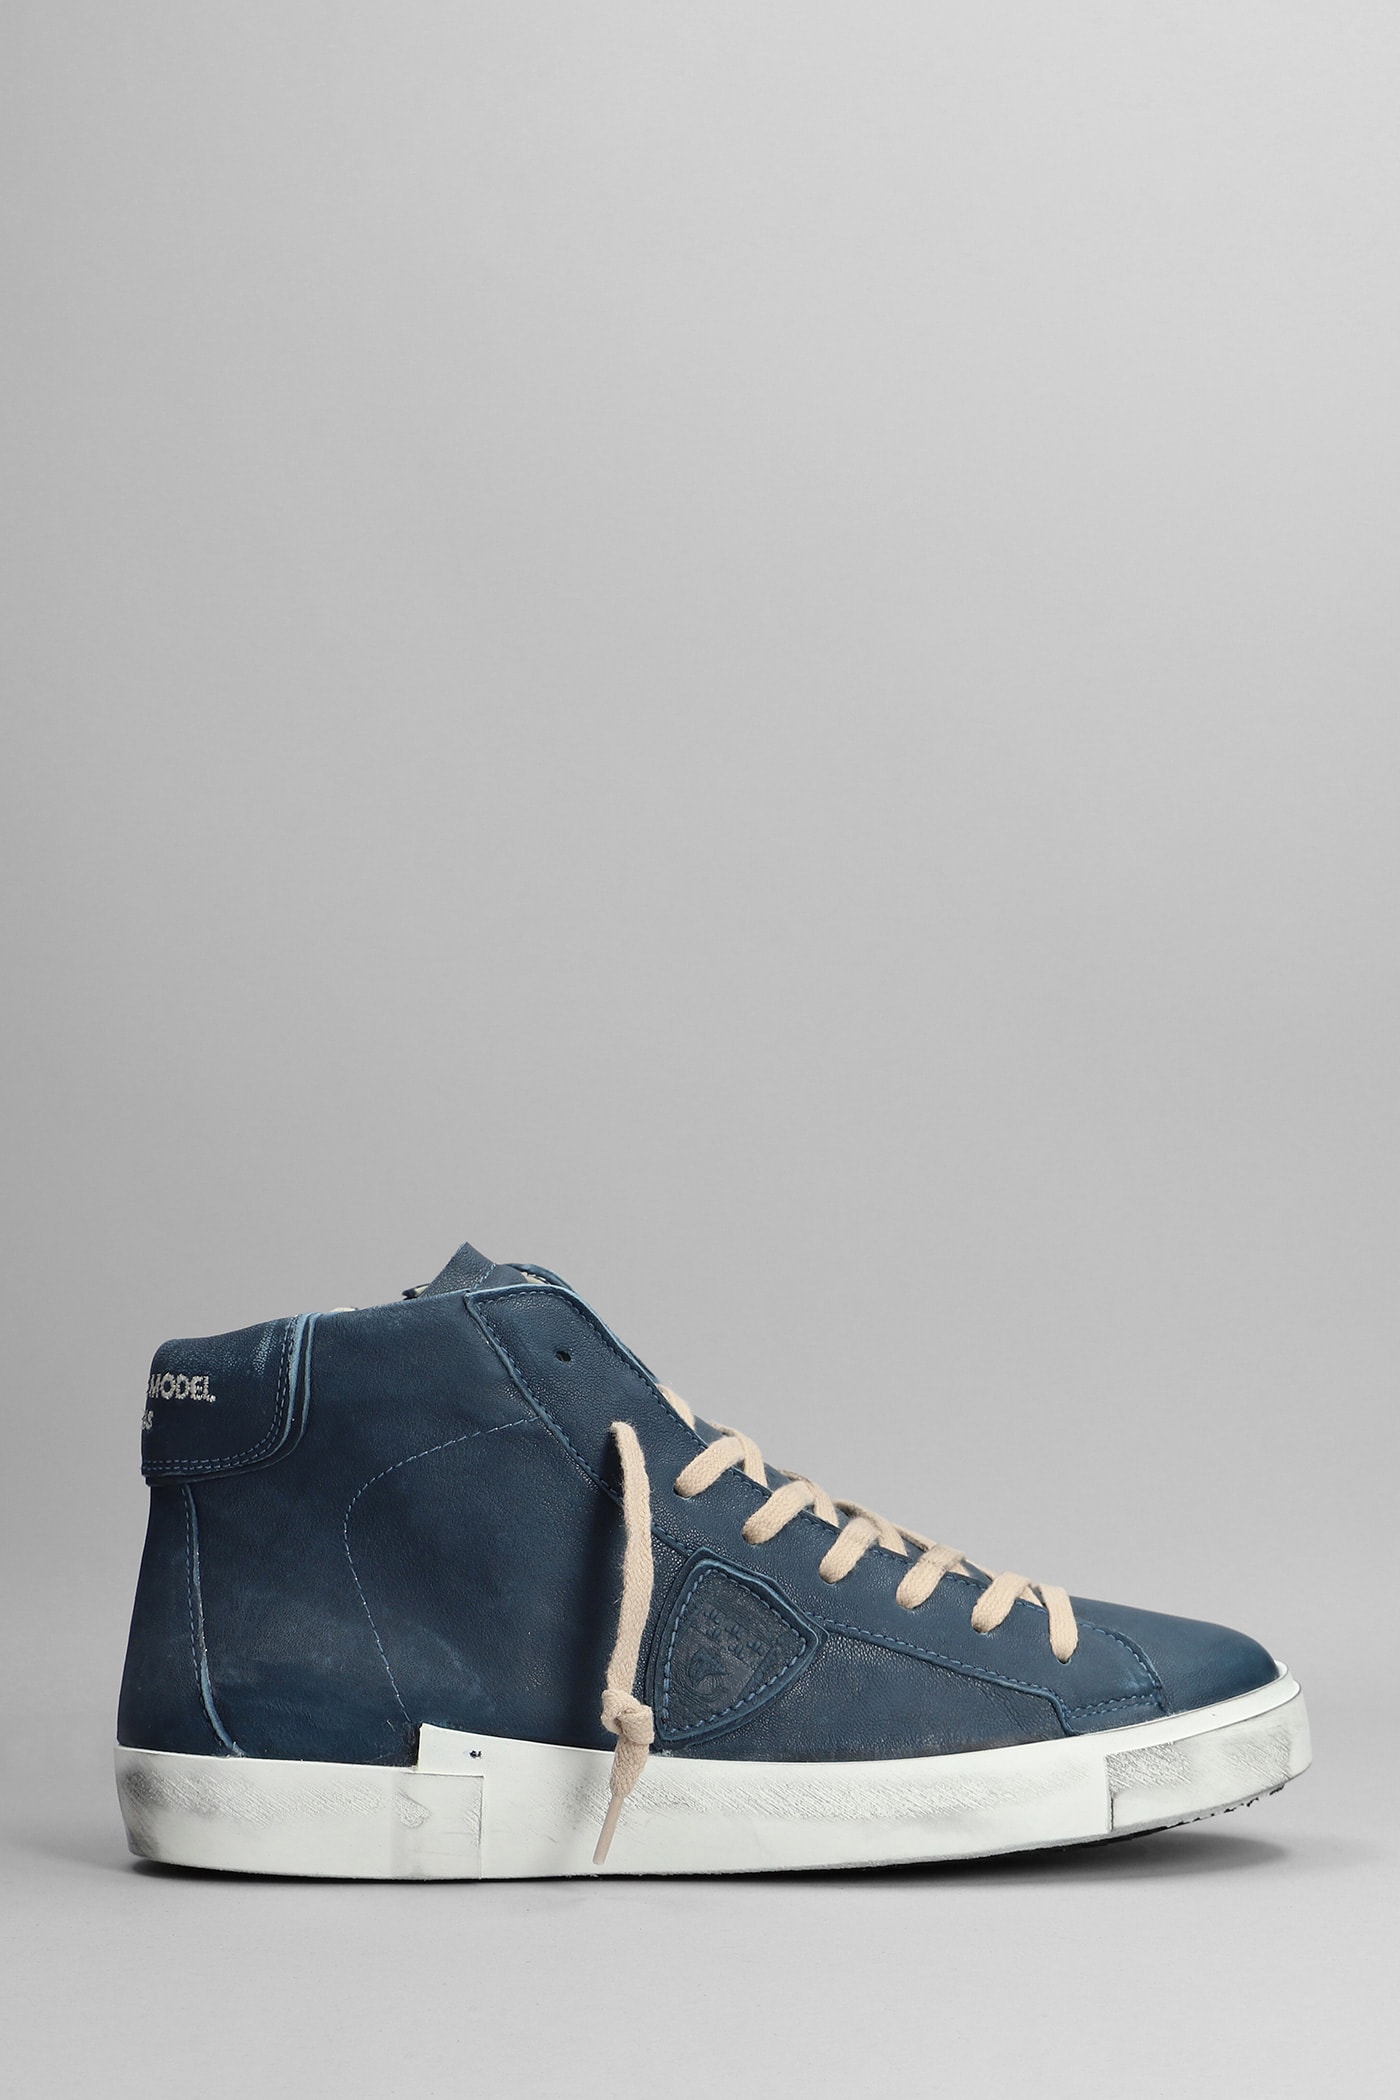 Philippe Model Prsx High Sneakers In Blue Leather